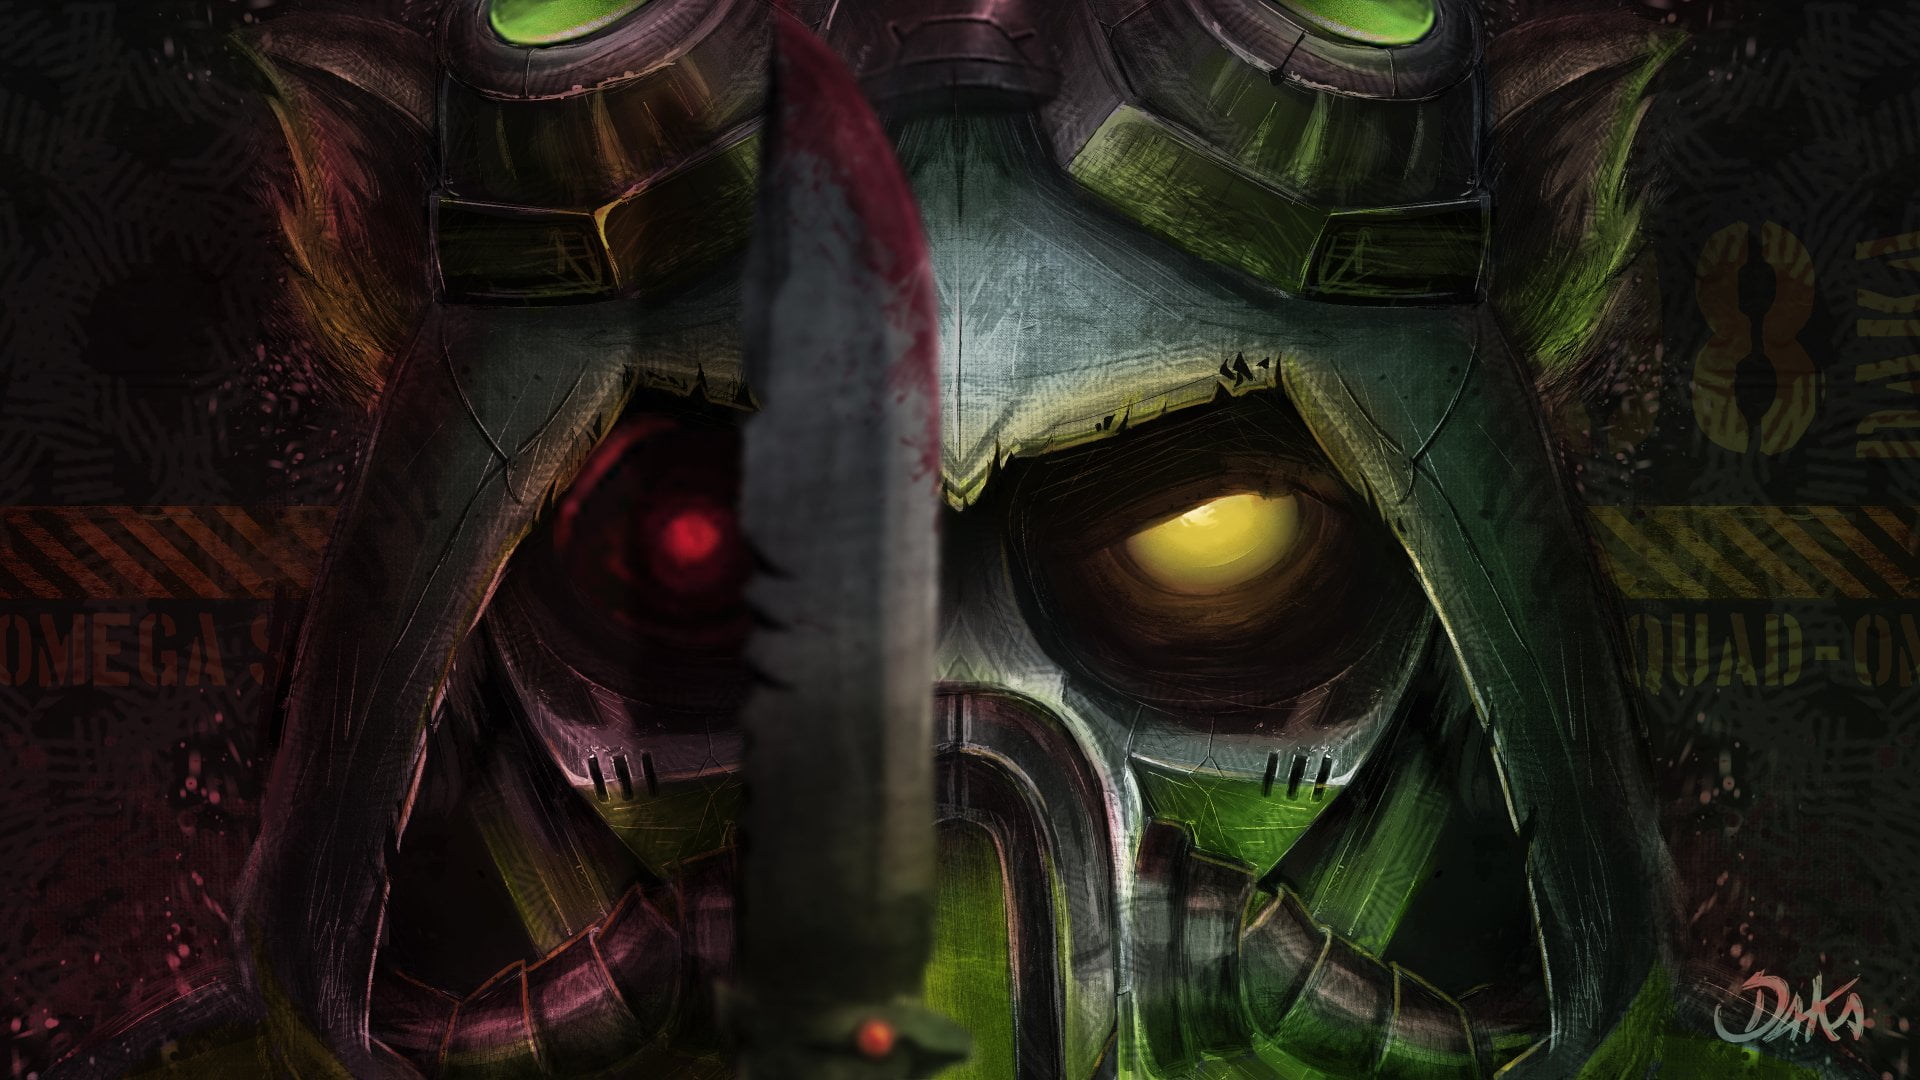 gray and multicolored Daka wallpaper, Video Game, League Of Legends